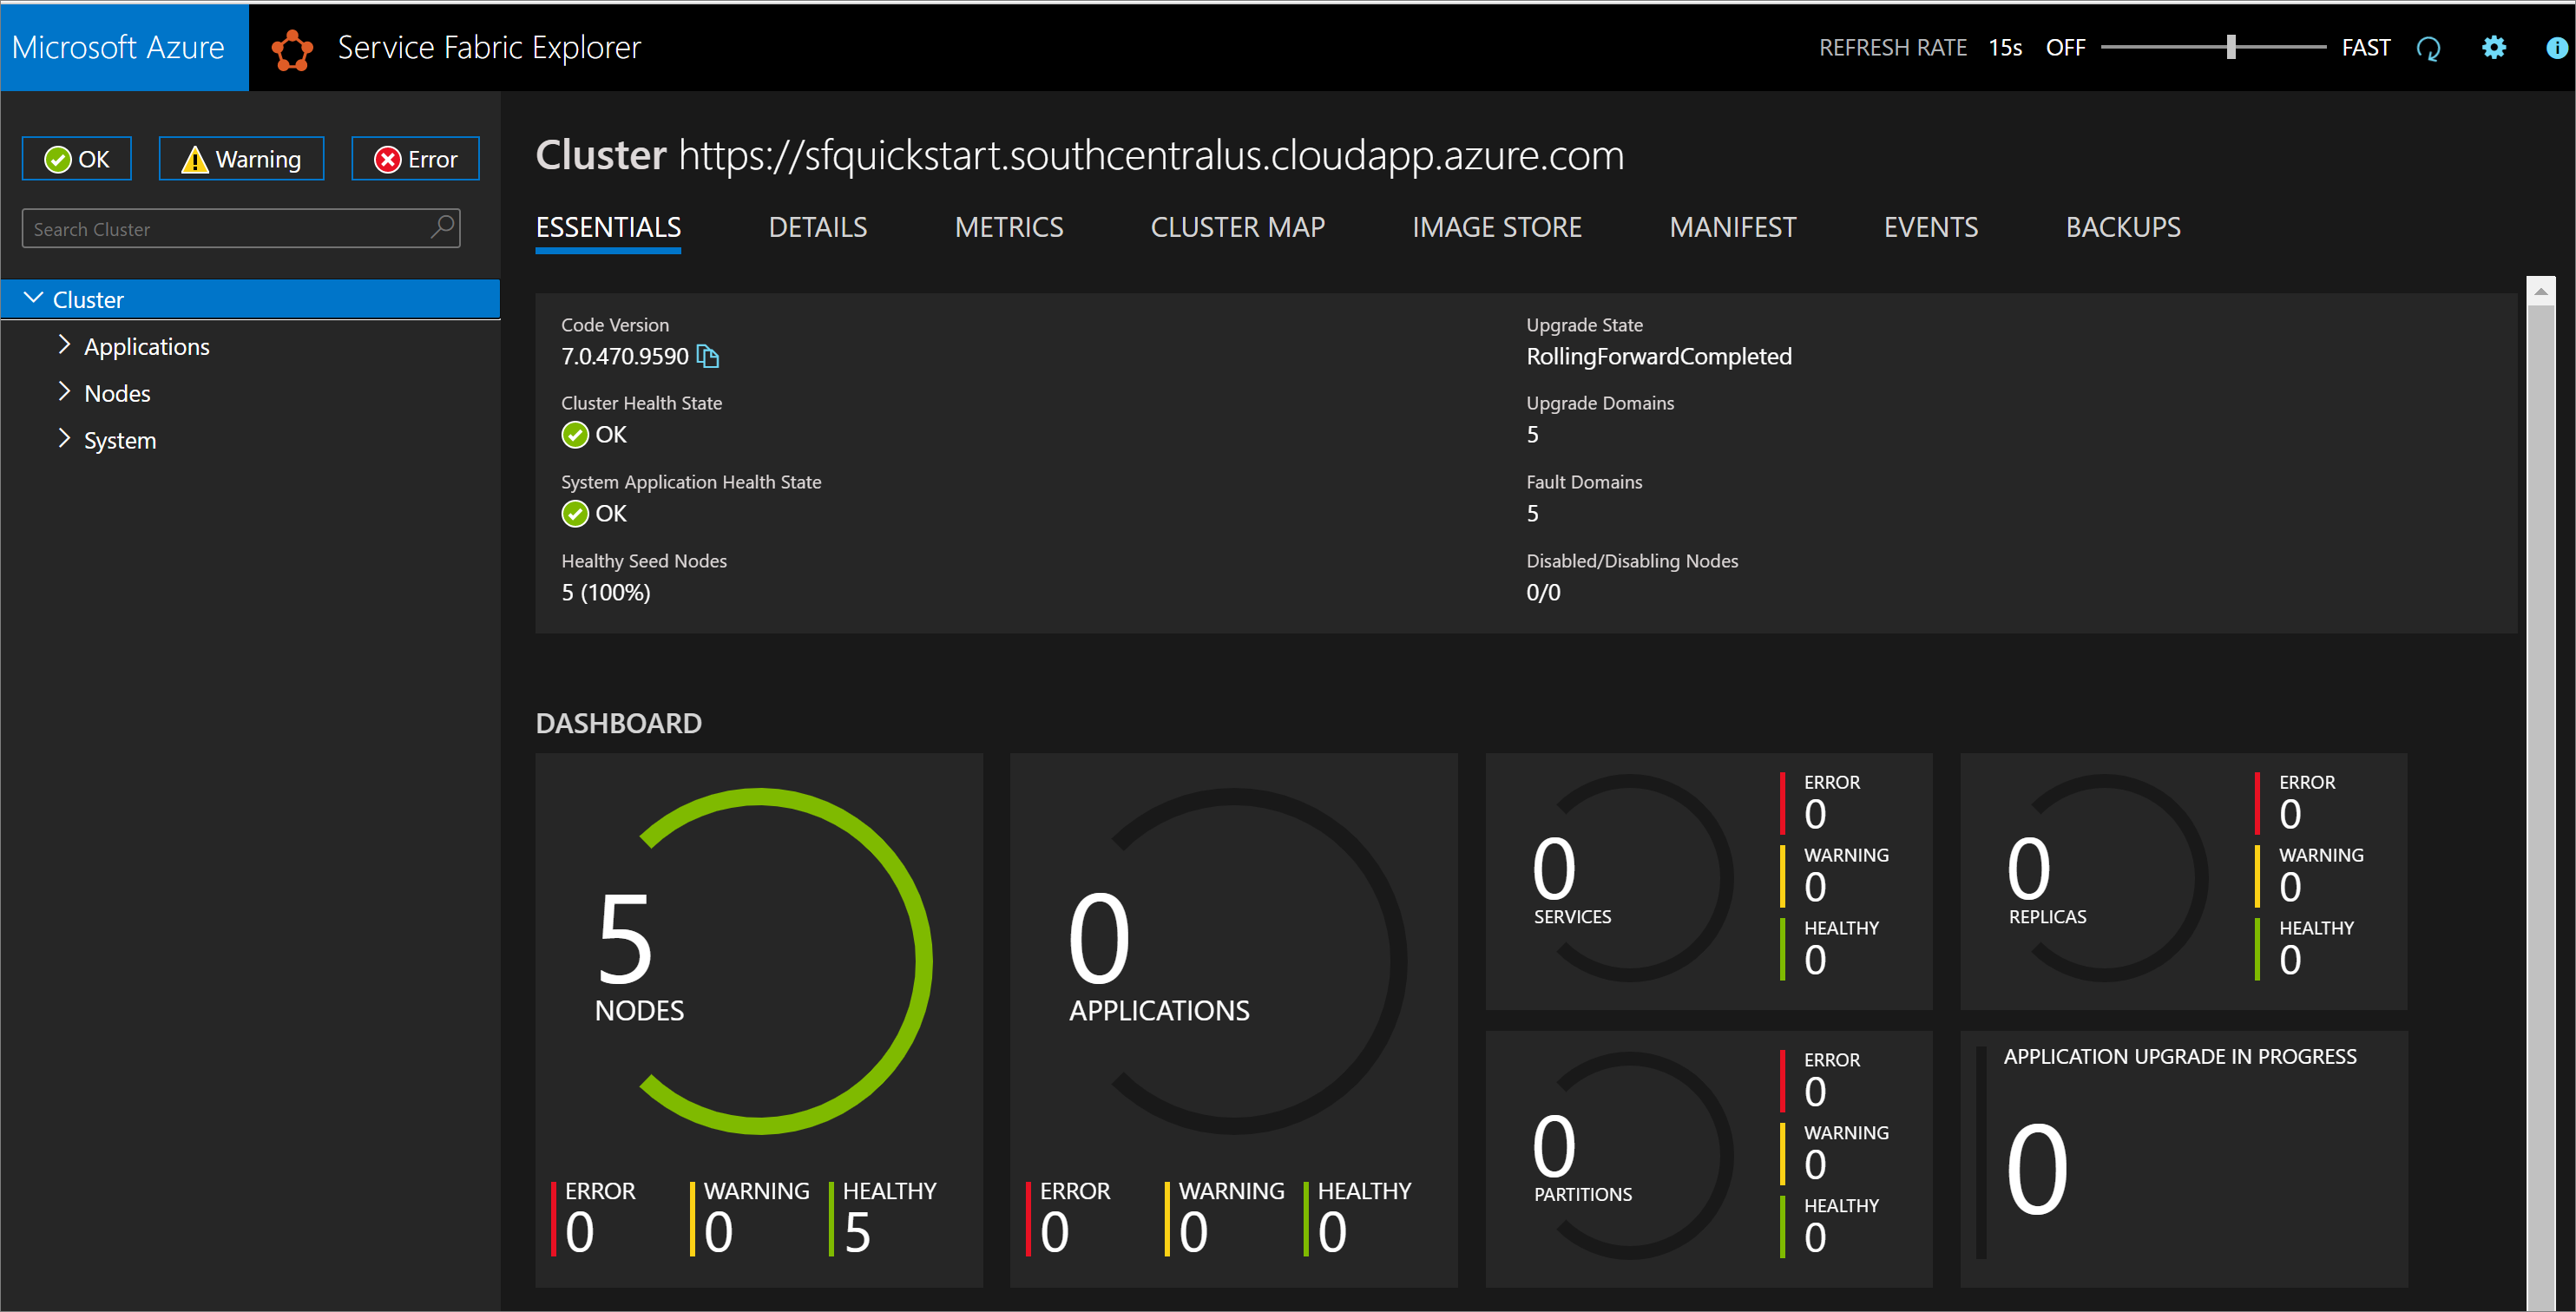 Screenshot of the Service Fabric Explorer showing new cluster.